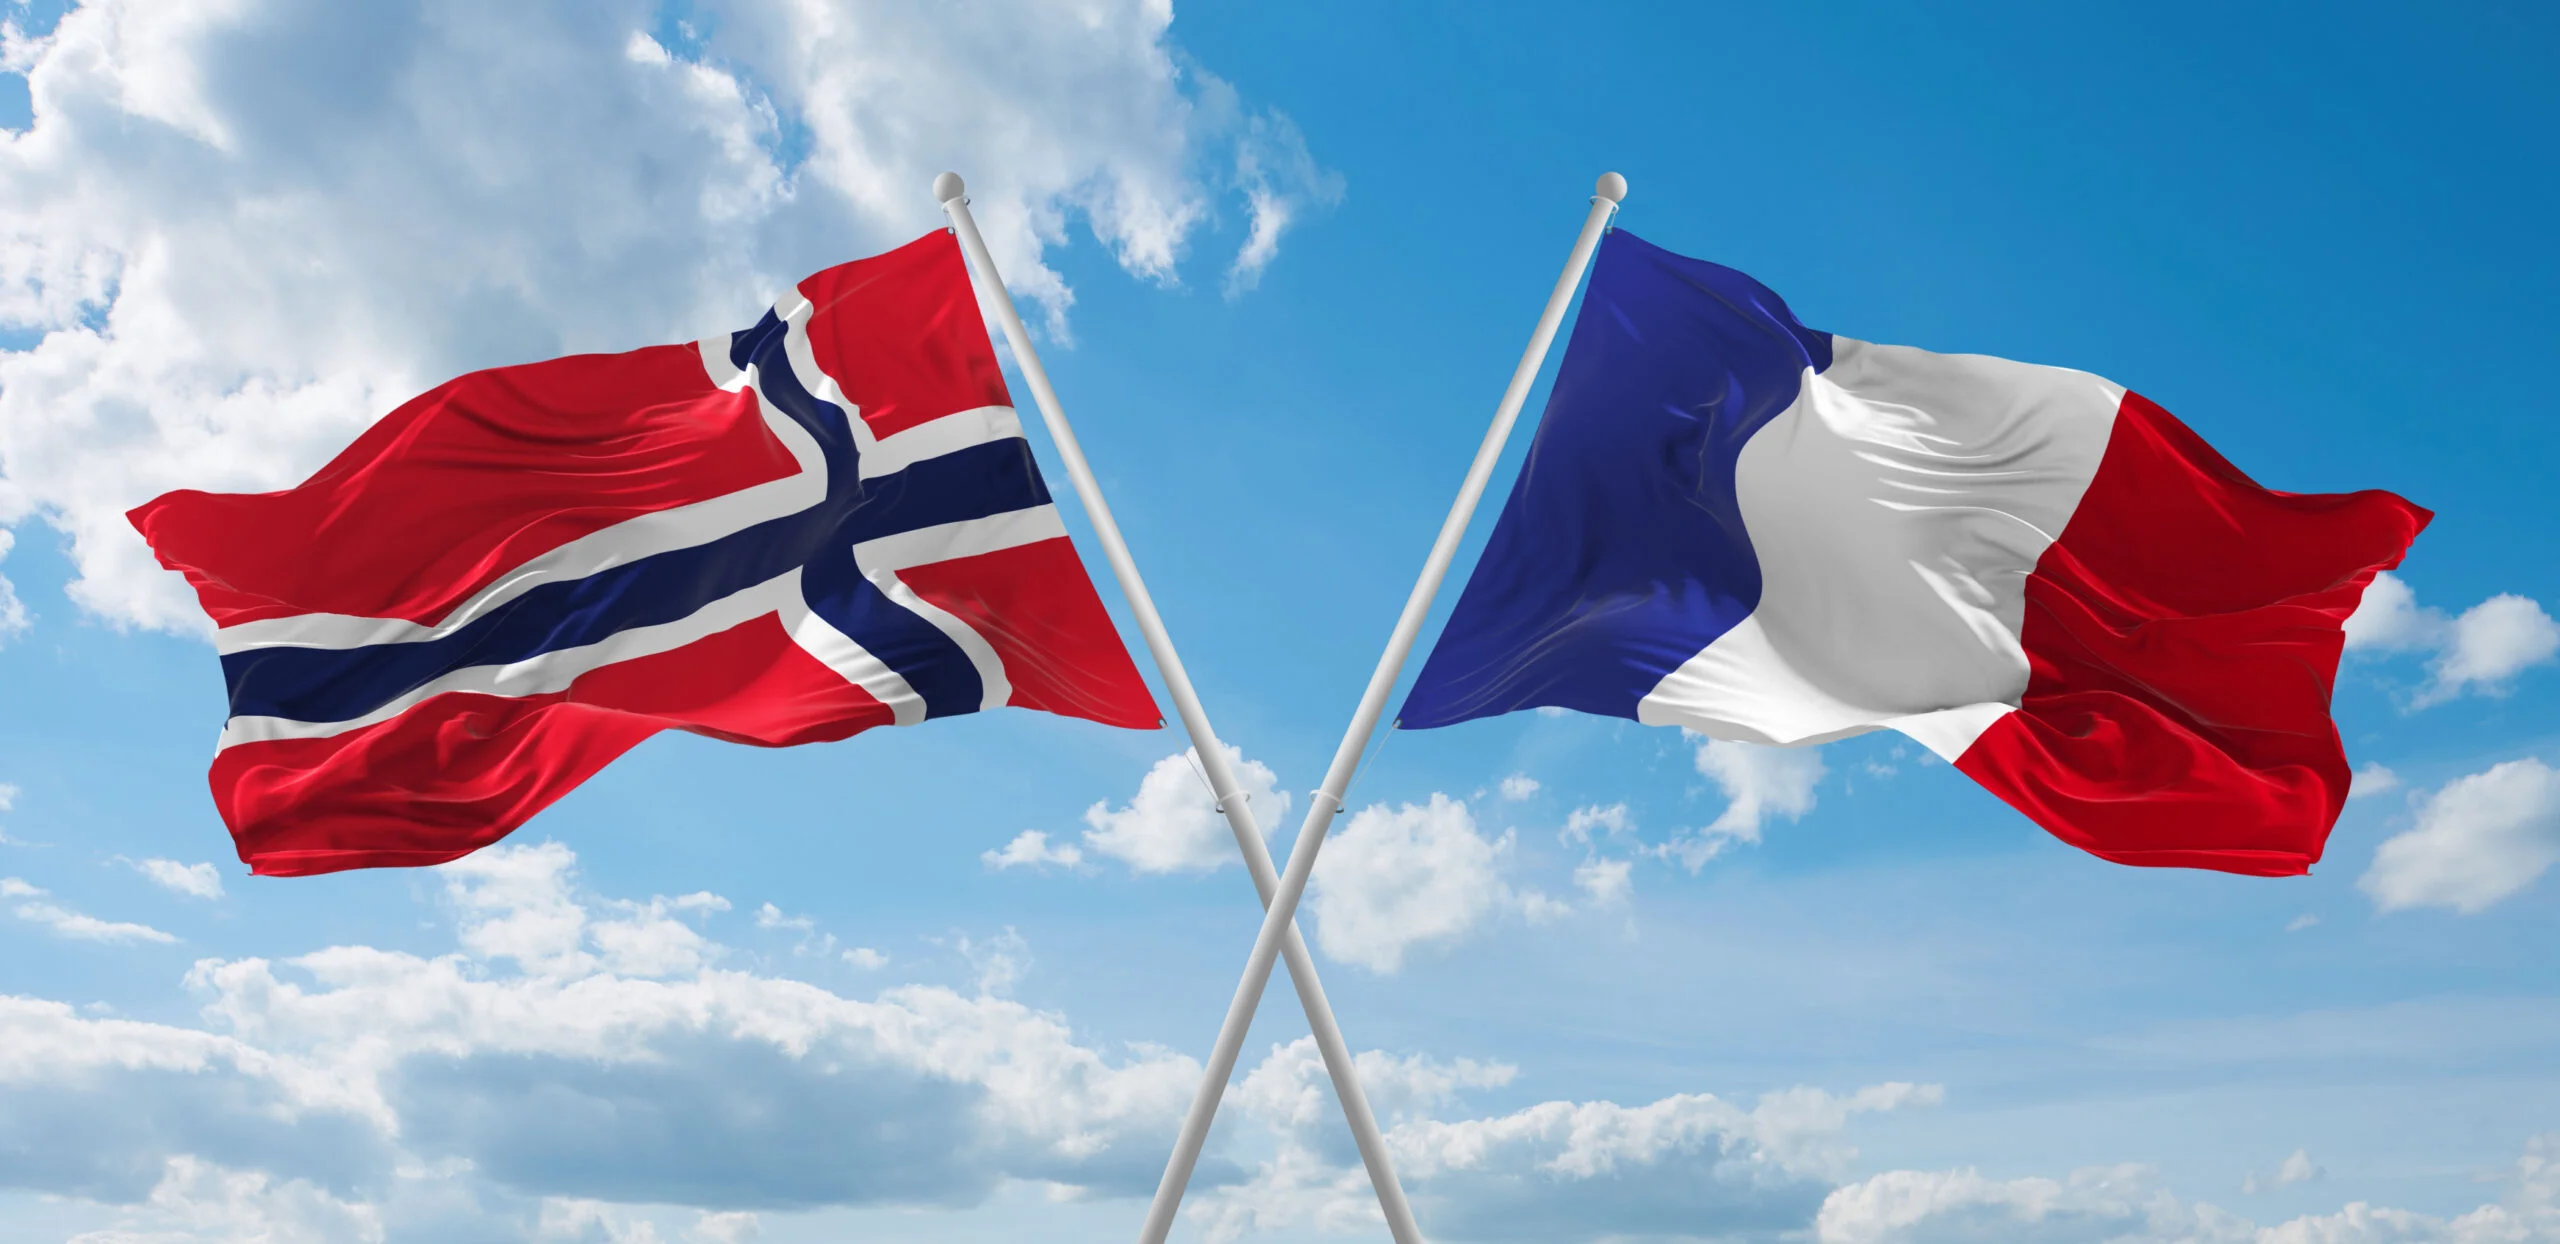 Flags of Norway and France.